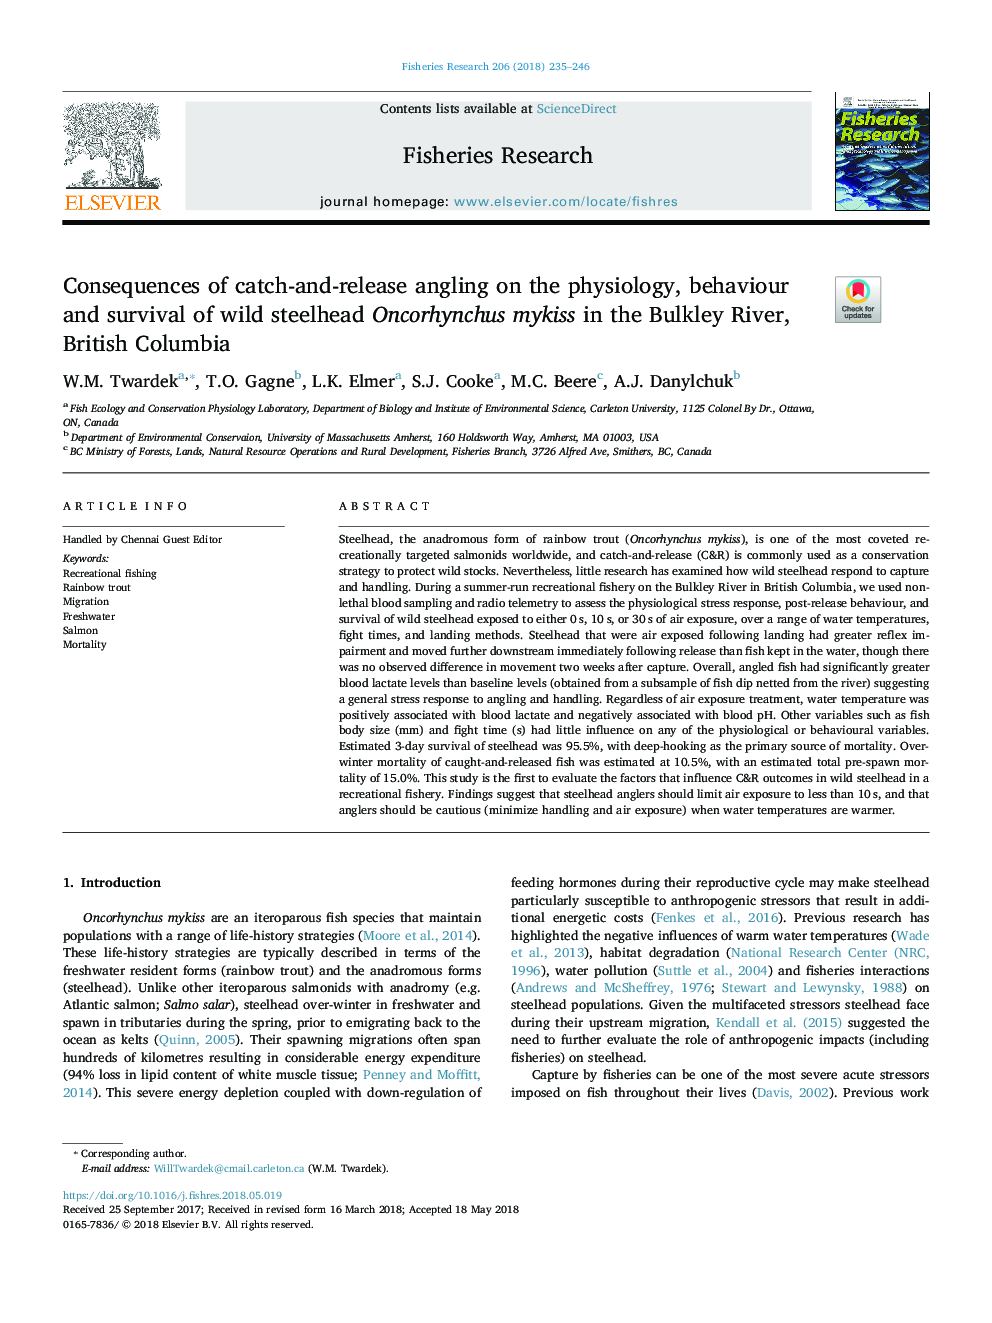 Consequences of catch-and-release angling on the physiology, behaviour and survival of wild steelhead Oncorhynchus mykiss in the Bulkley River, British Columbia